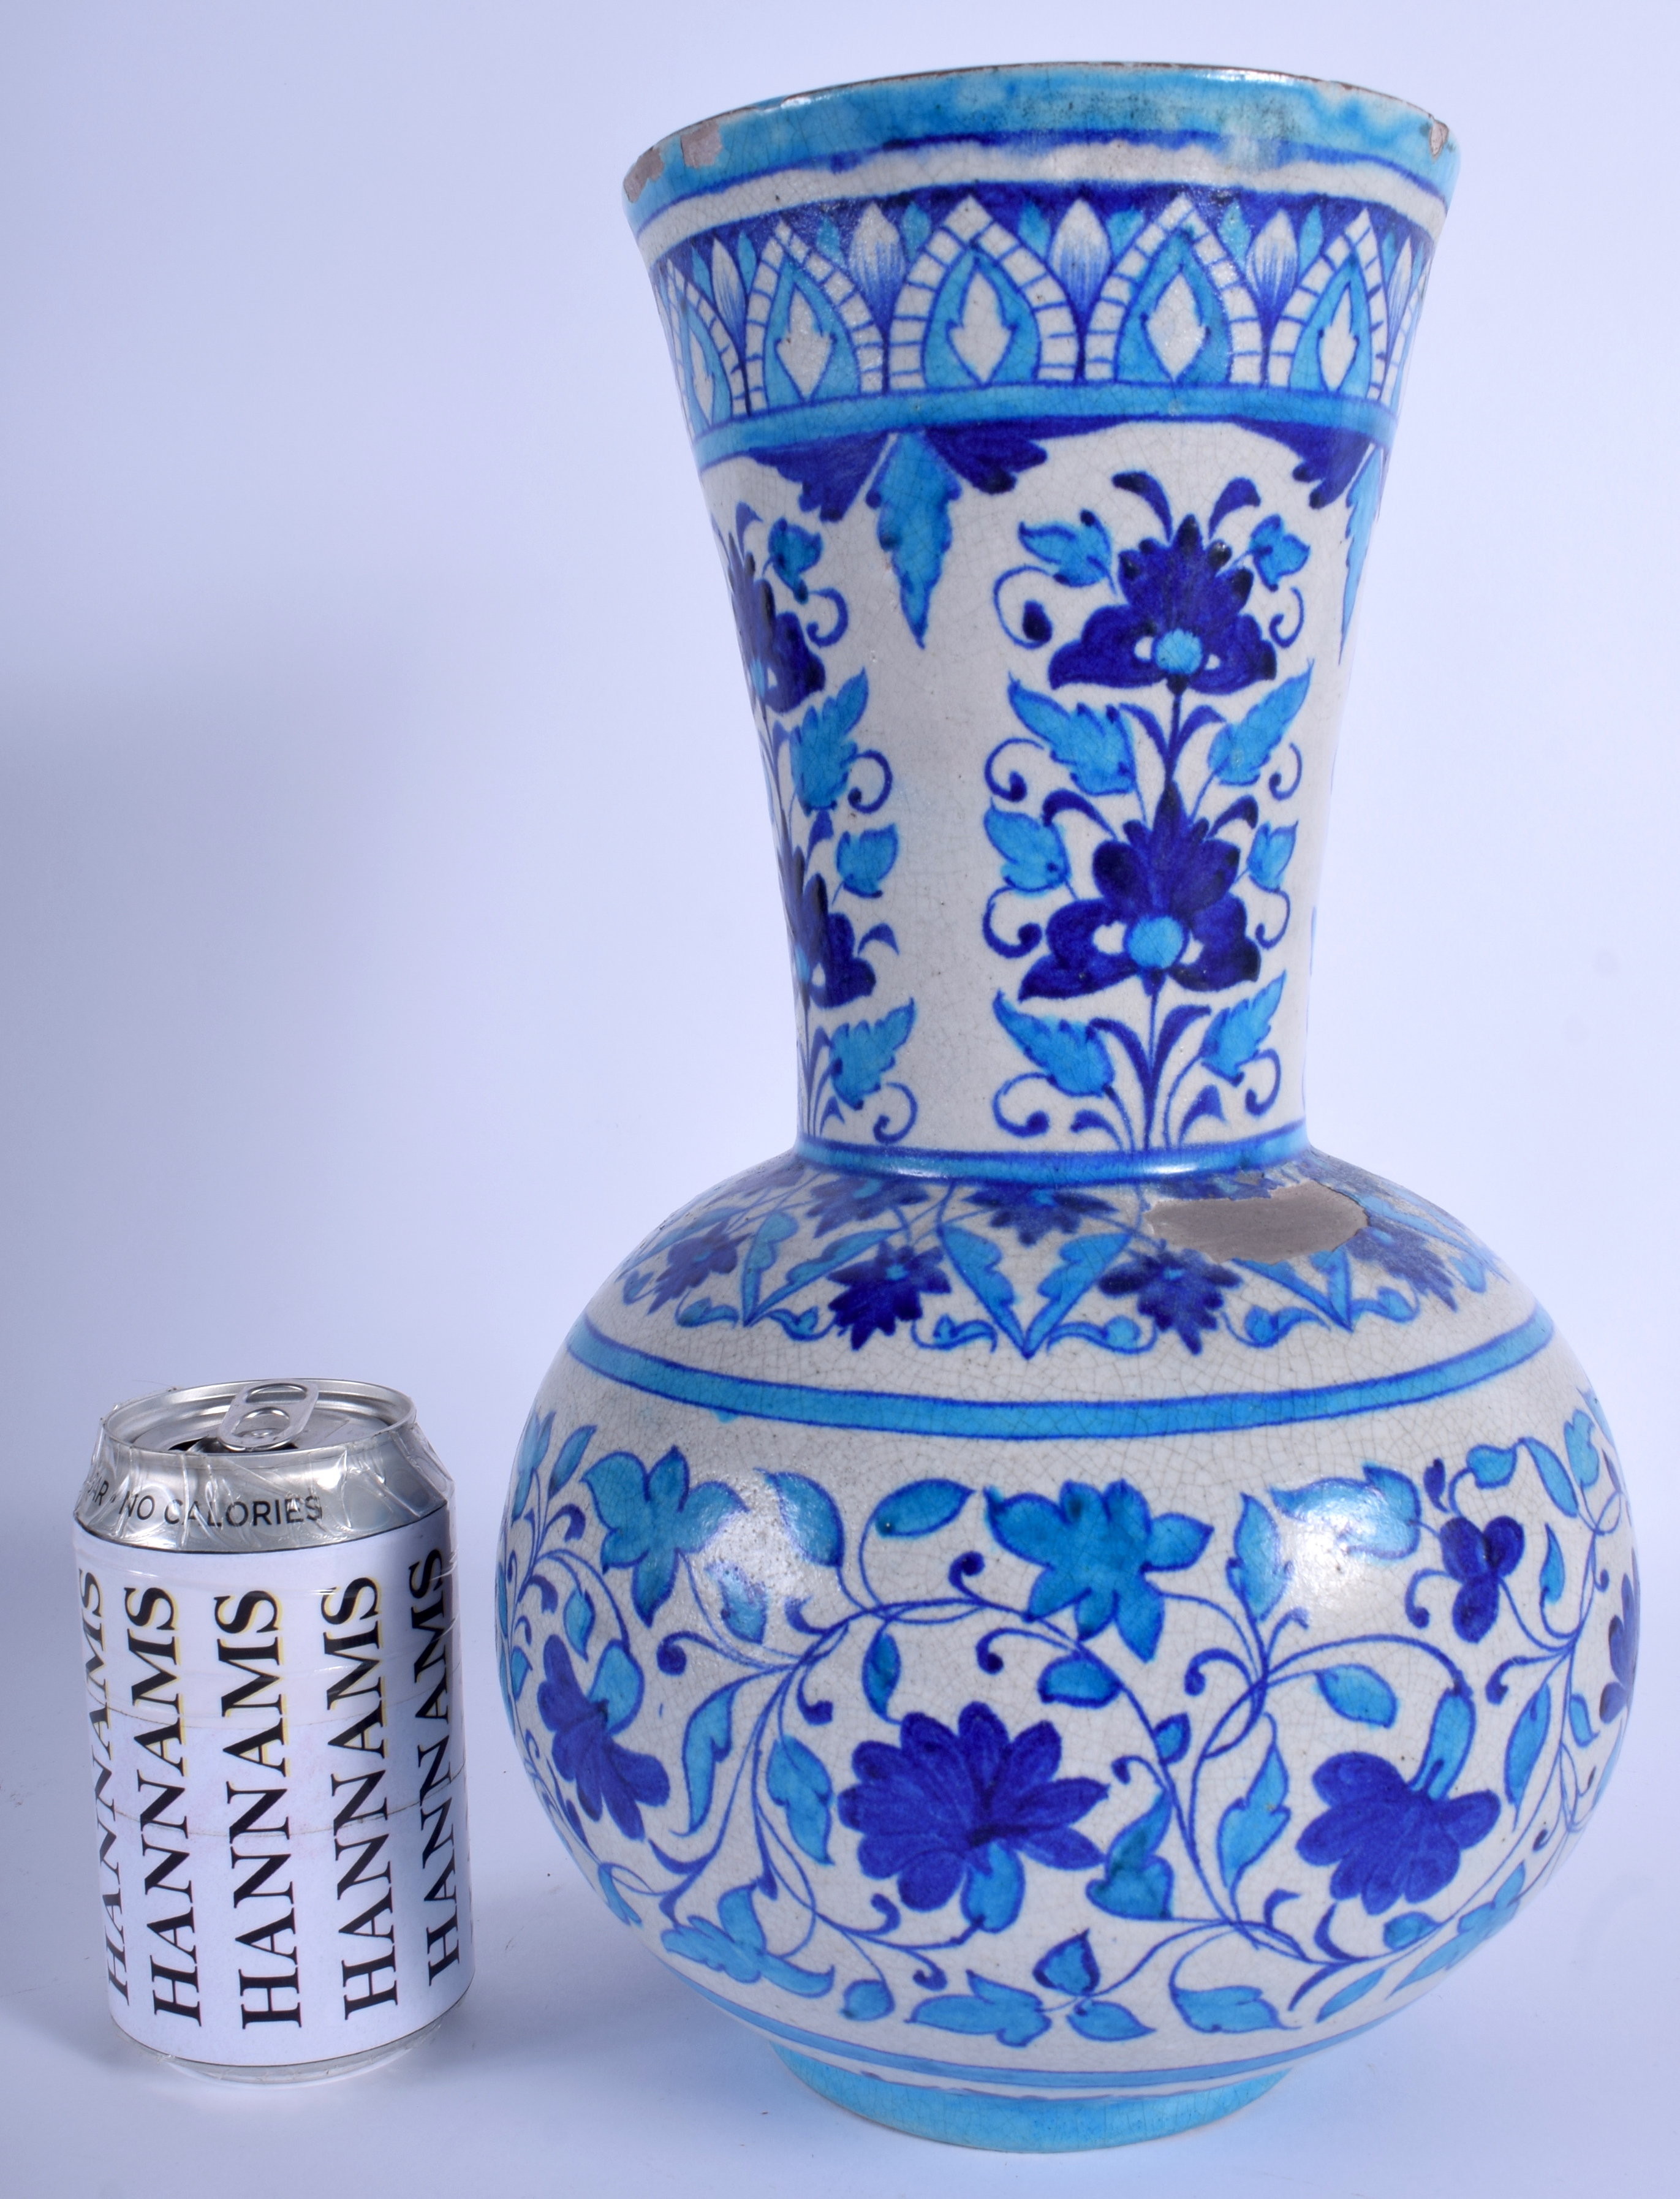 A LARGE PERSIAN MIDDLE EASTERN ISLAMIC FAIENCE BLUE VASE painted with flowers. 34 cm high.